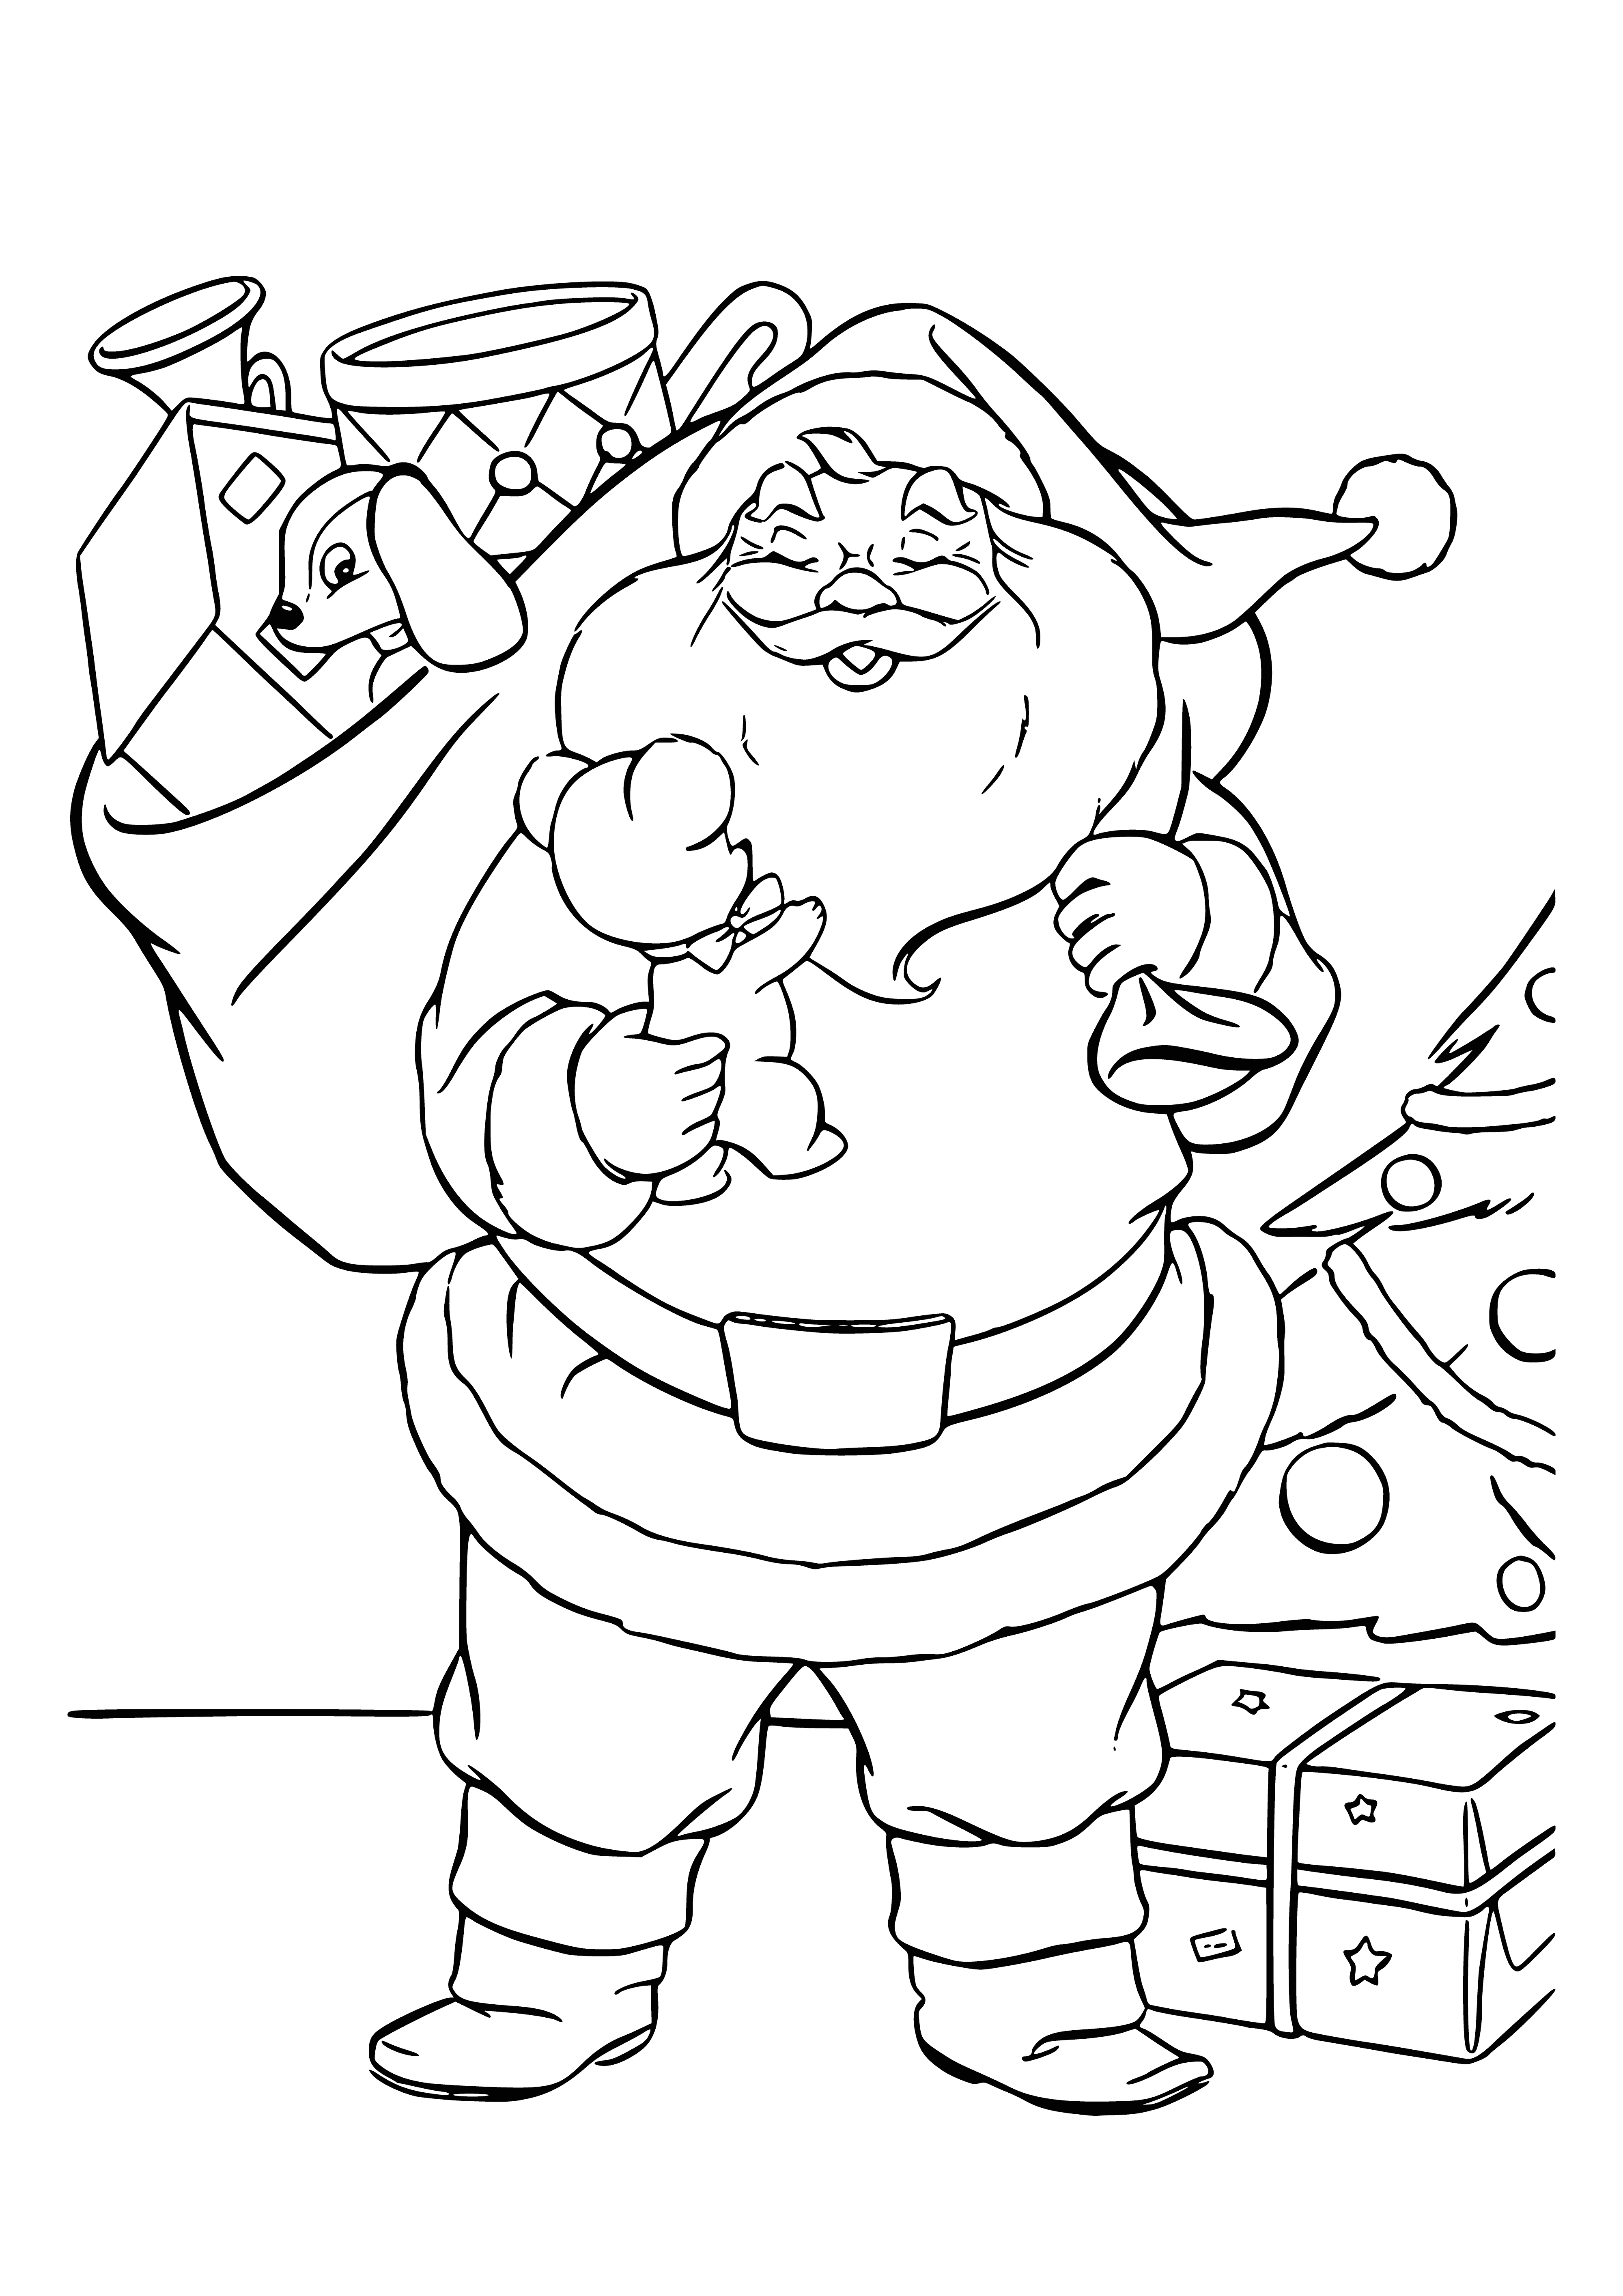 Coloring page of Santa Claus with Christmas tree and presents. #Christmas #Coloring